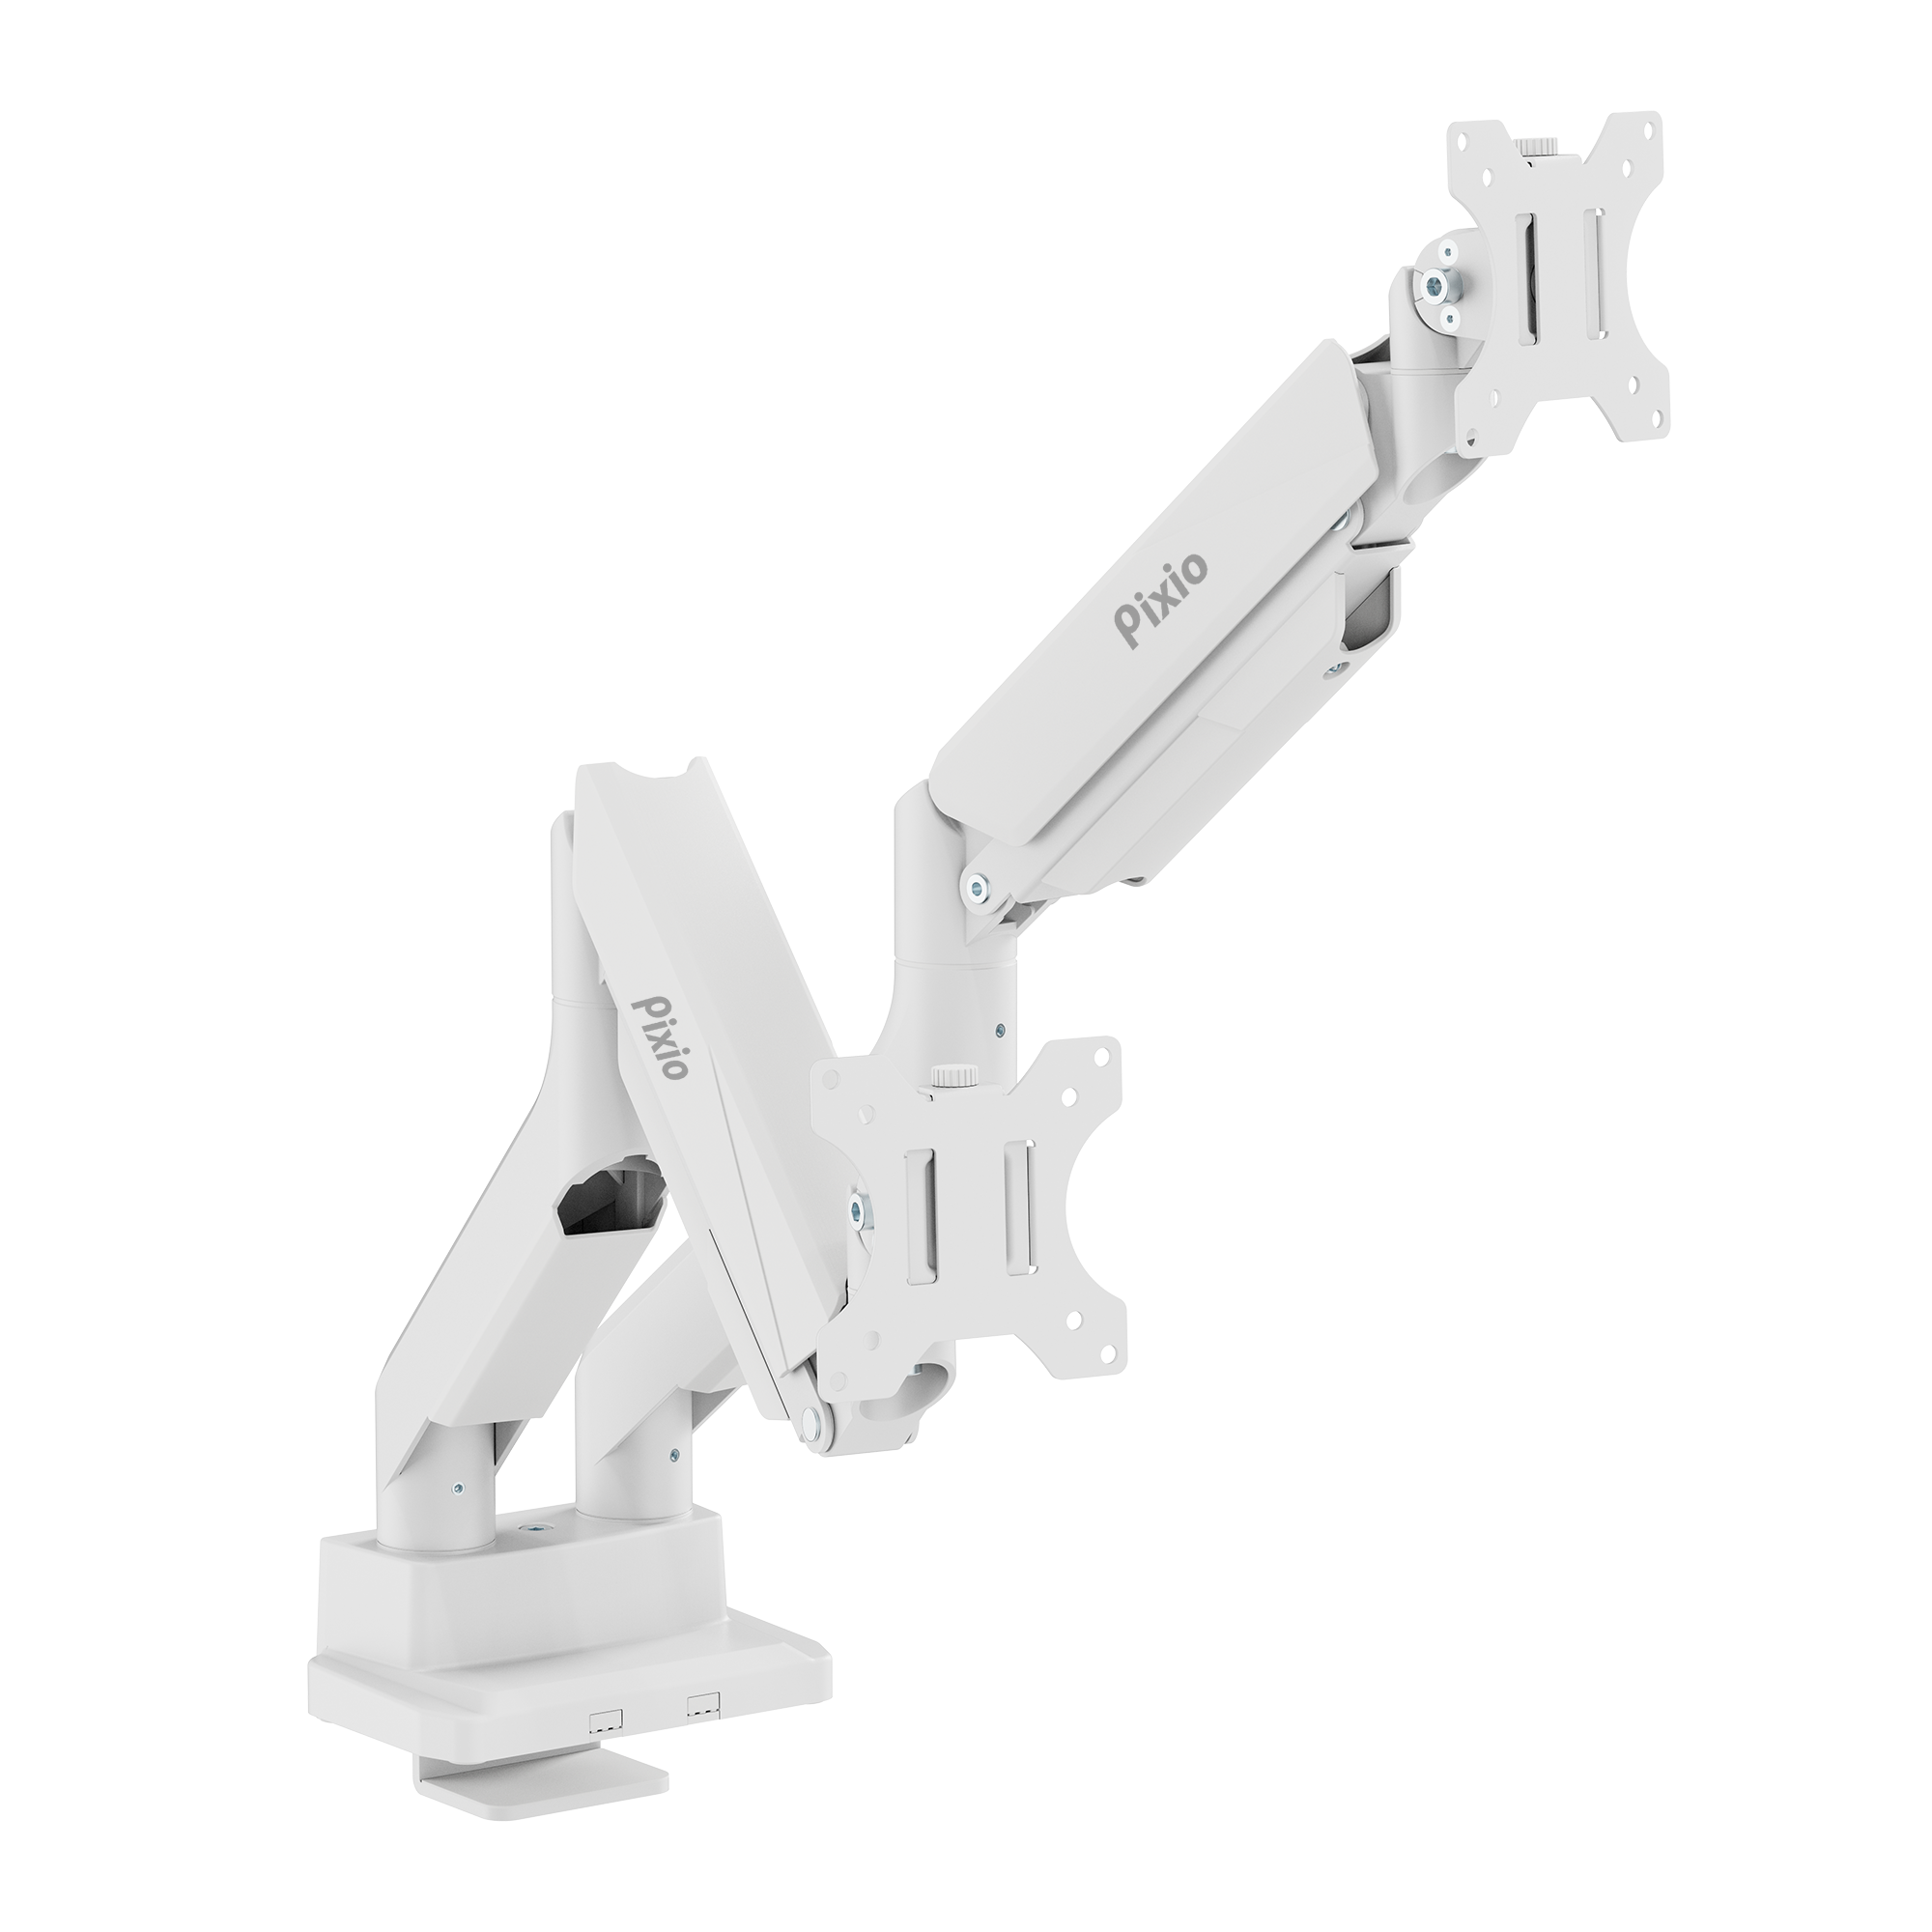 PS2DW Dual Monitor Arm Mount